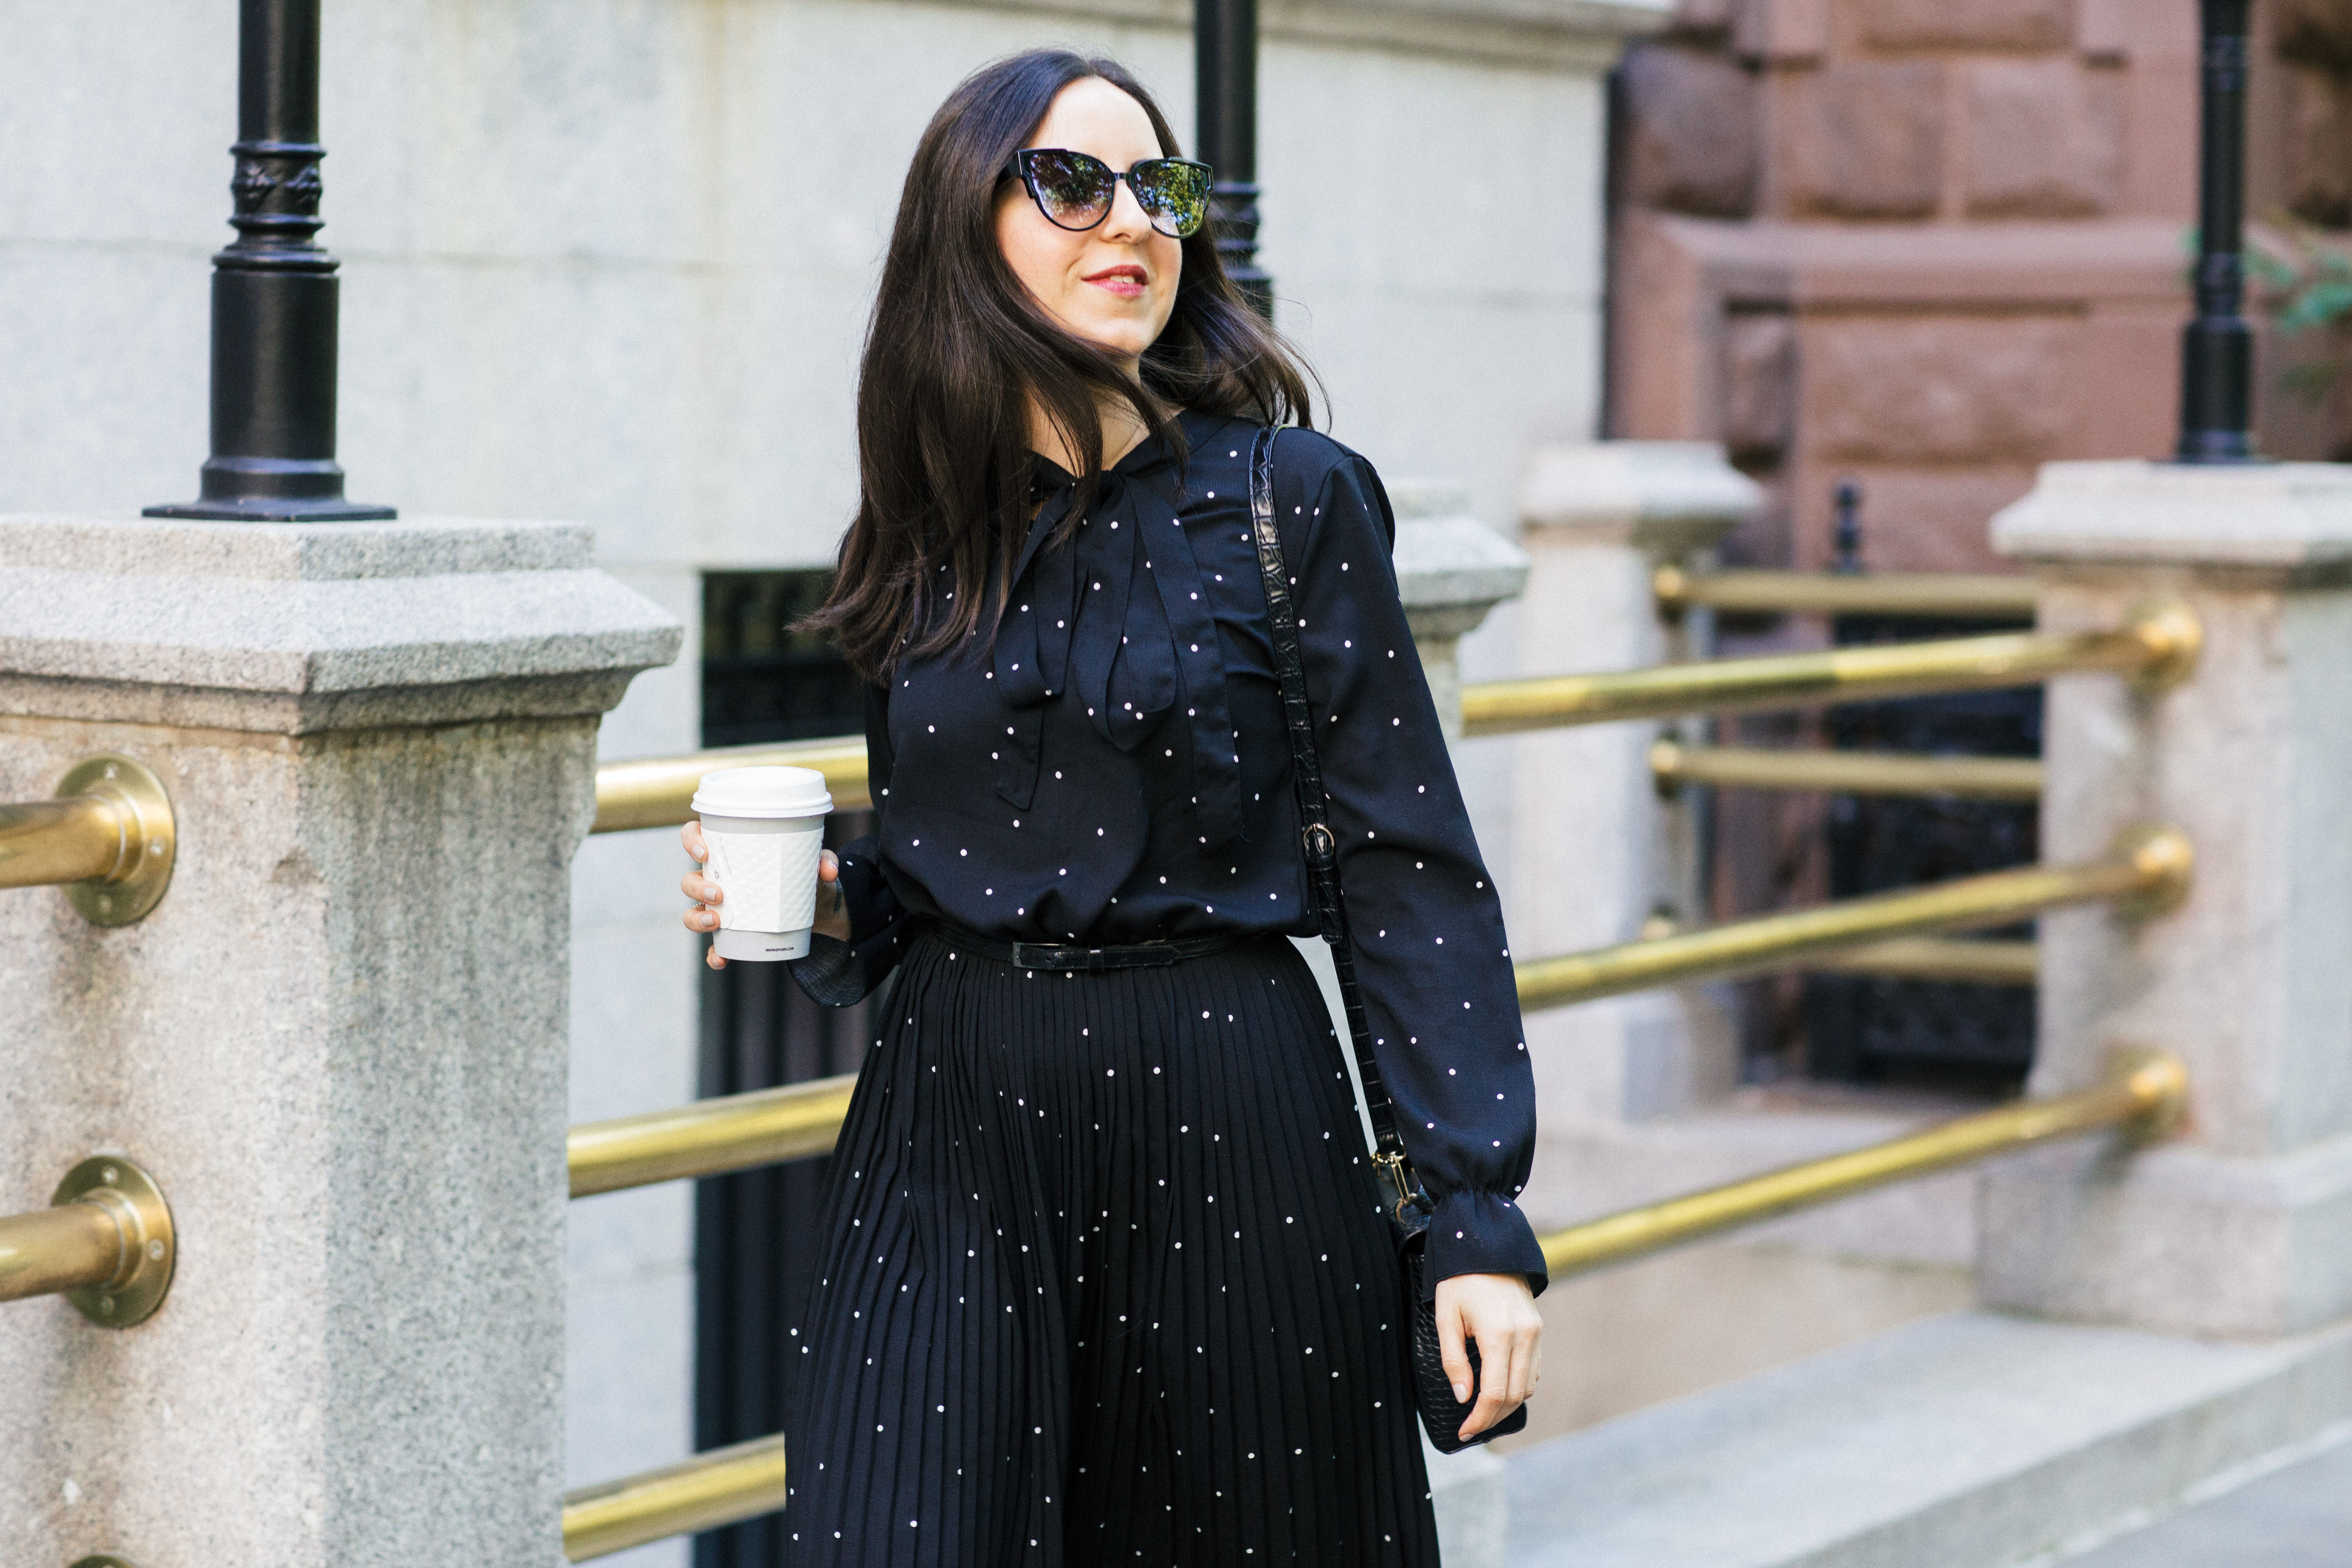 Yana Frigelis of NoMad Luxuries wearing a black polka dot dress from Romwe for the fall in Gramercy Park New York